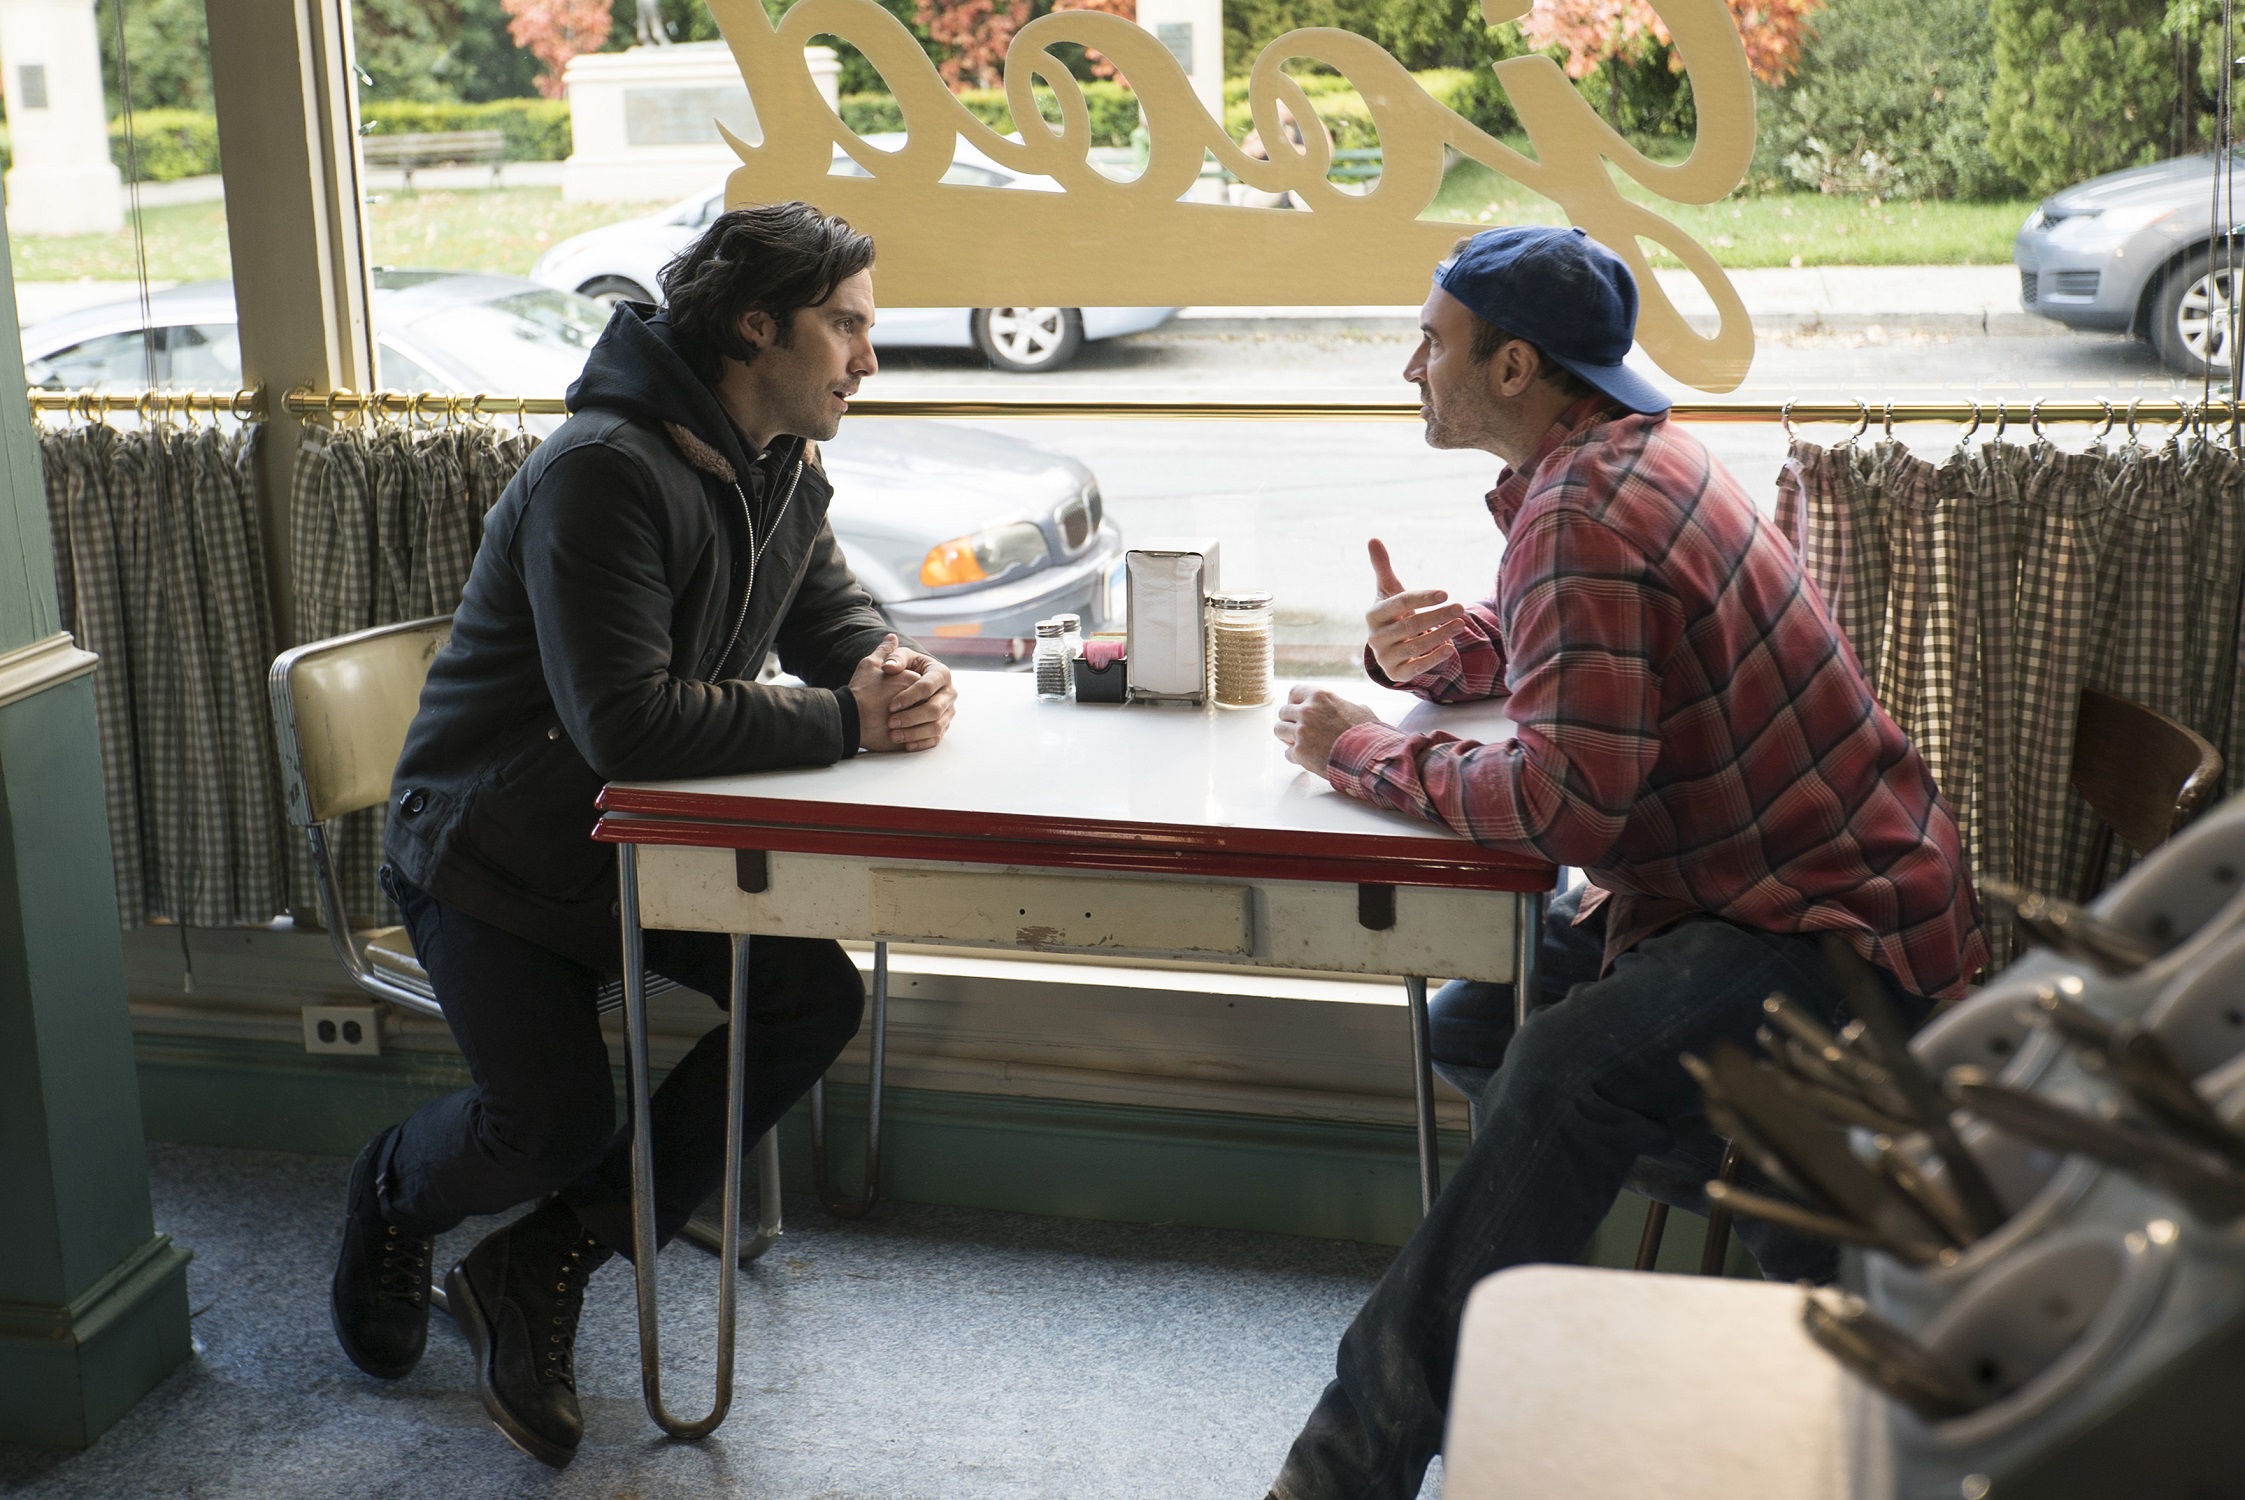 Milo Ventimiglia as Jess Mariano and Scott Patterson as Luke Danes in 'Gilmore Girls: A Year in the Life'